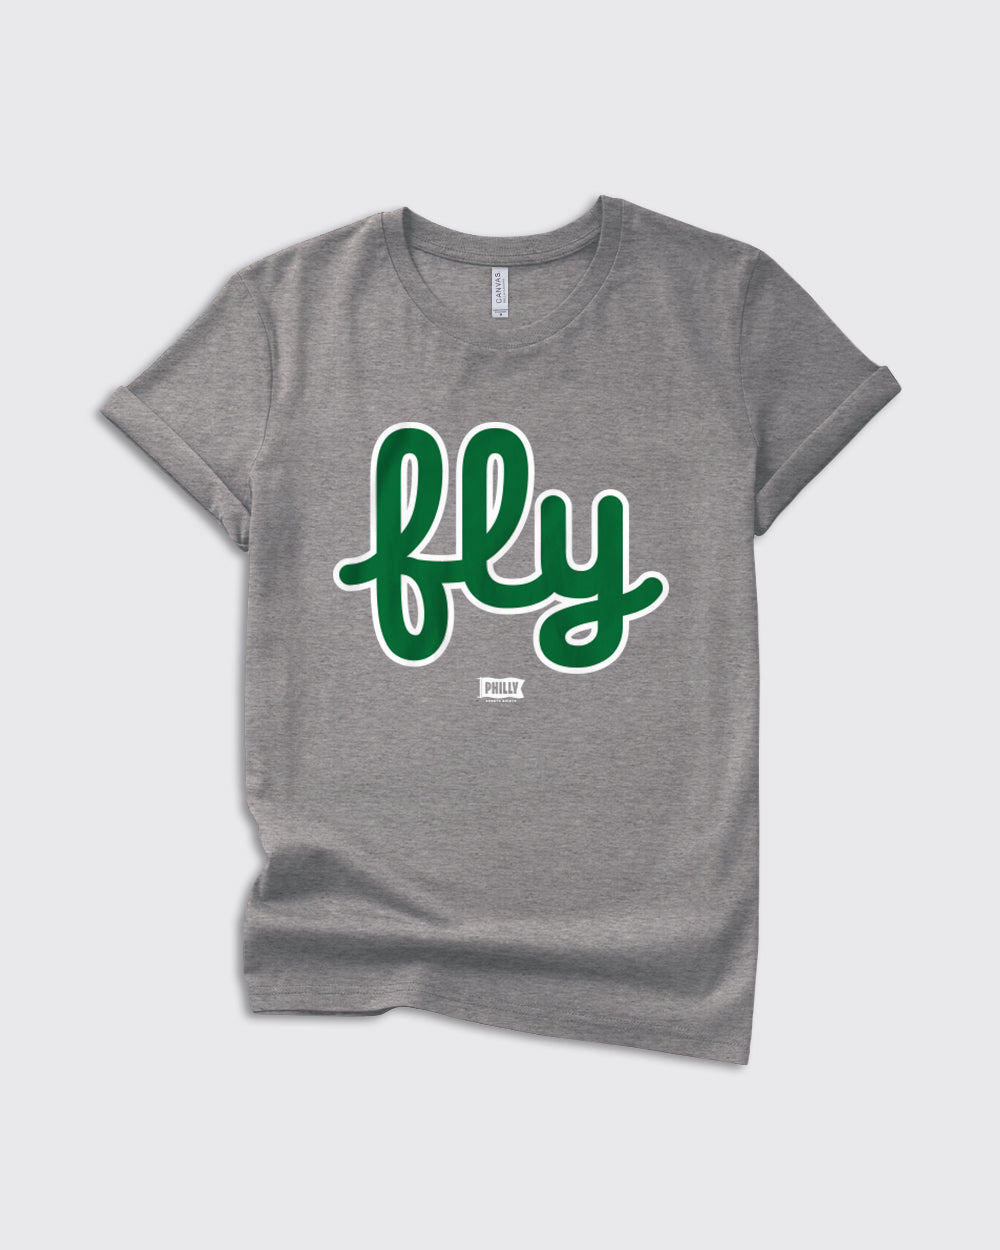 Kids Eagles Fly Shirt - Eagles, Kids, T-Shirts - Philly Sports Shirts